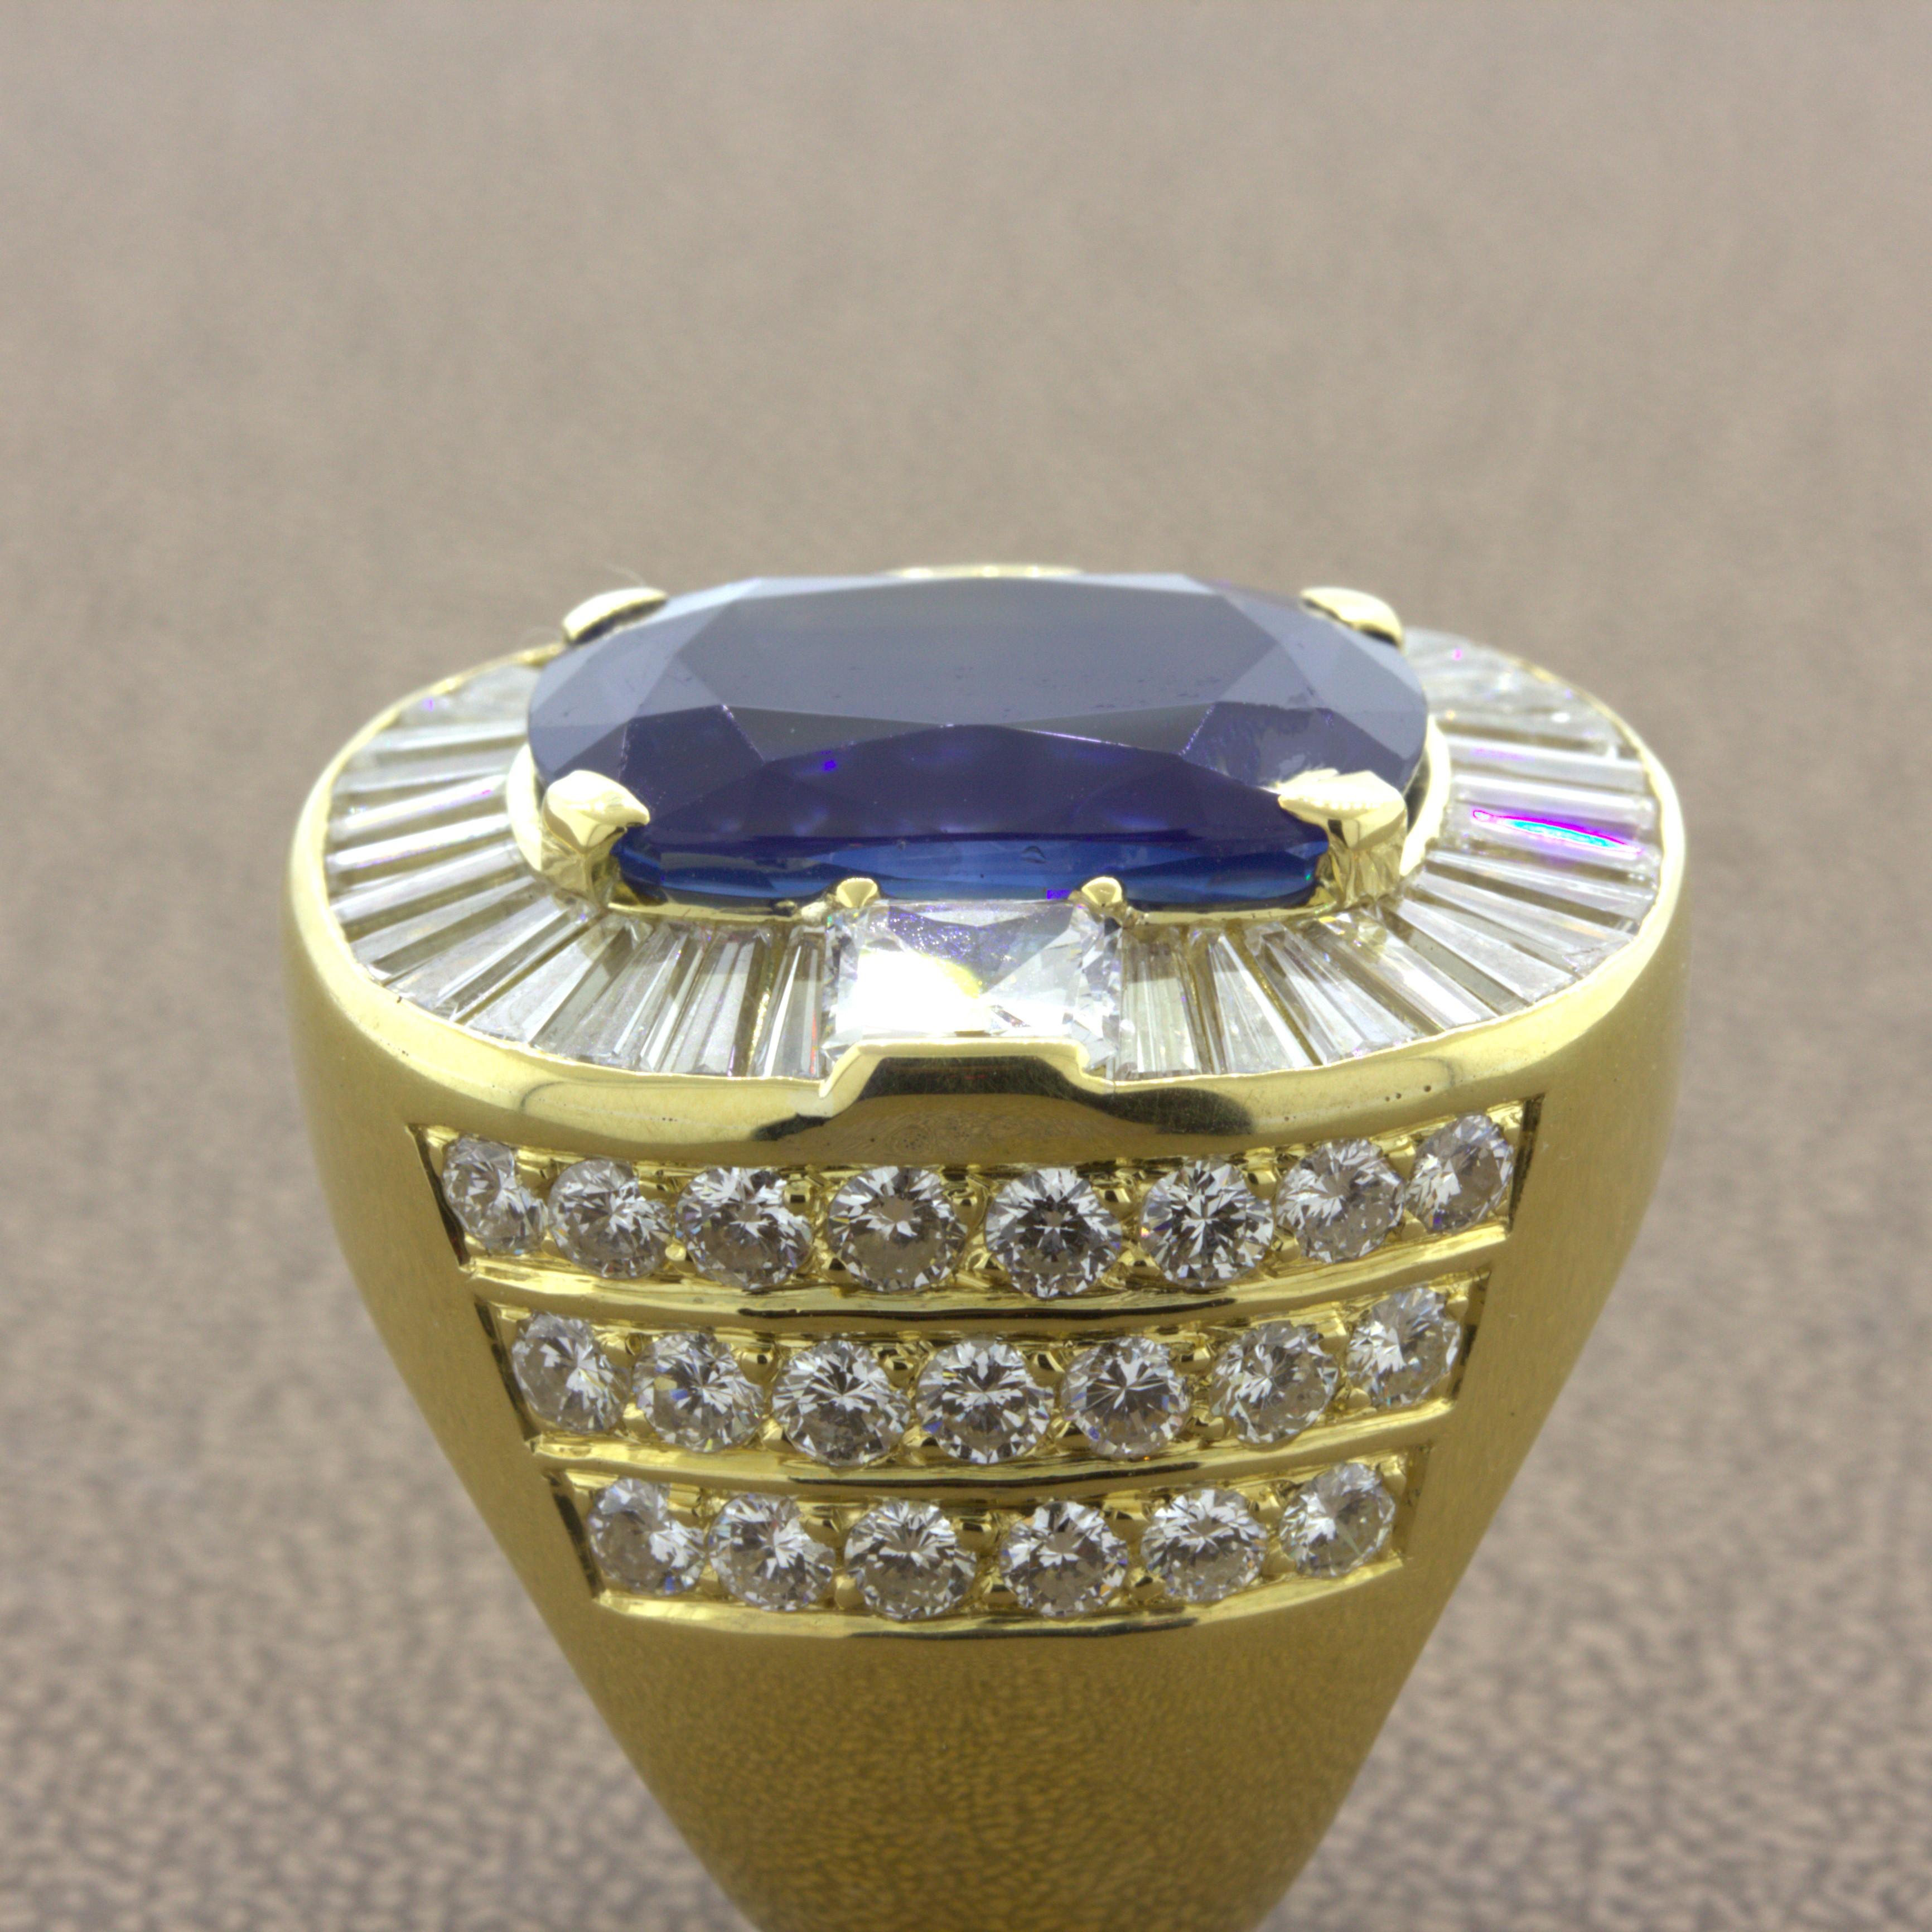 19.36 Carat Ceylon Sapphire Diamond 18K Yellow Gold Cocktail Ring, GIA Certified For Sale 3